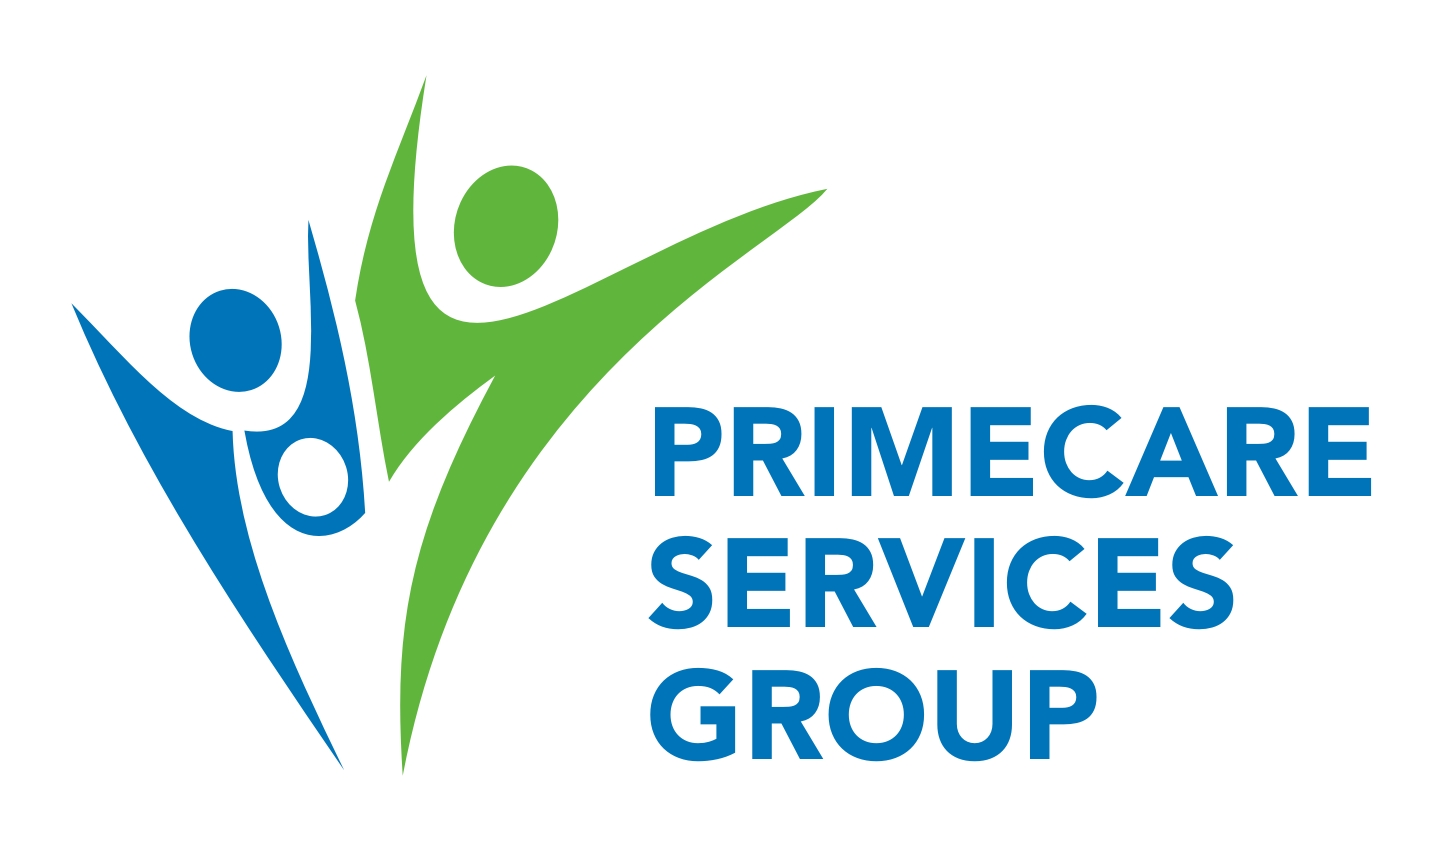 Primecare Services Group Limited